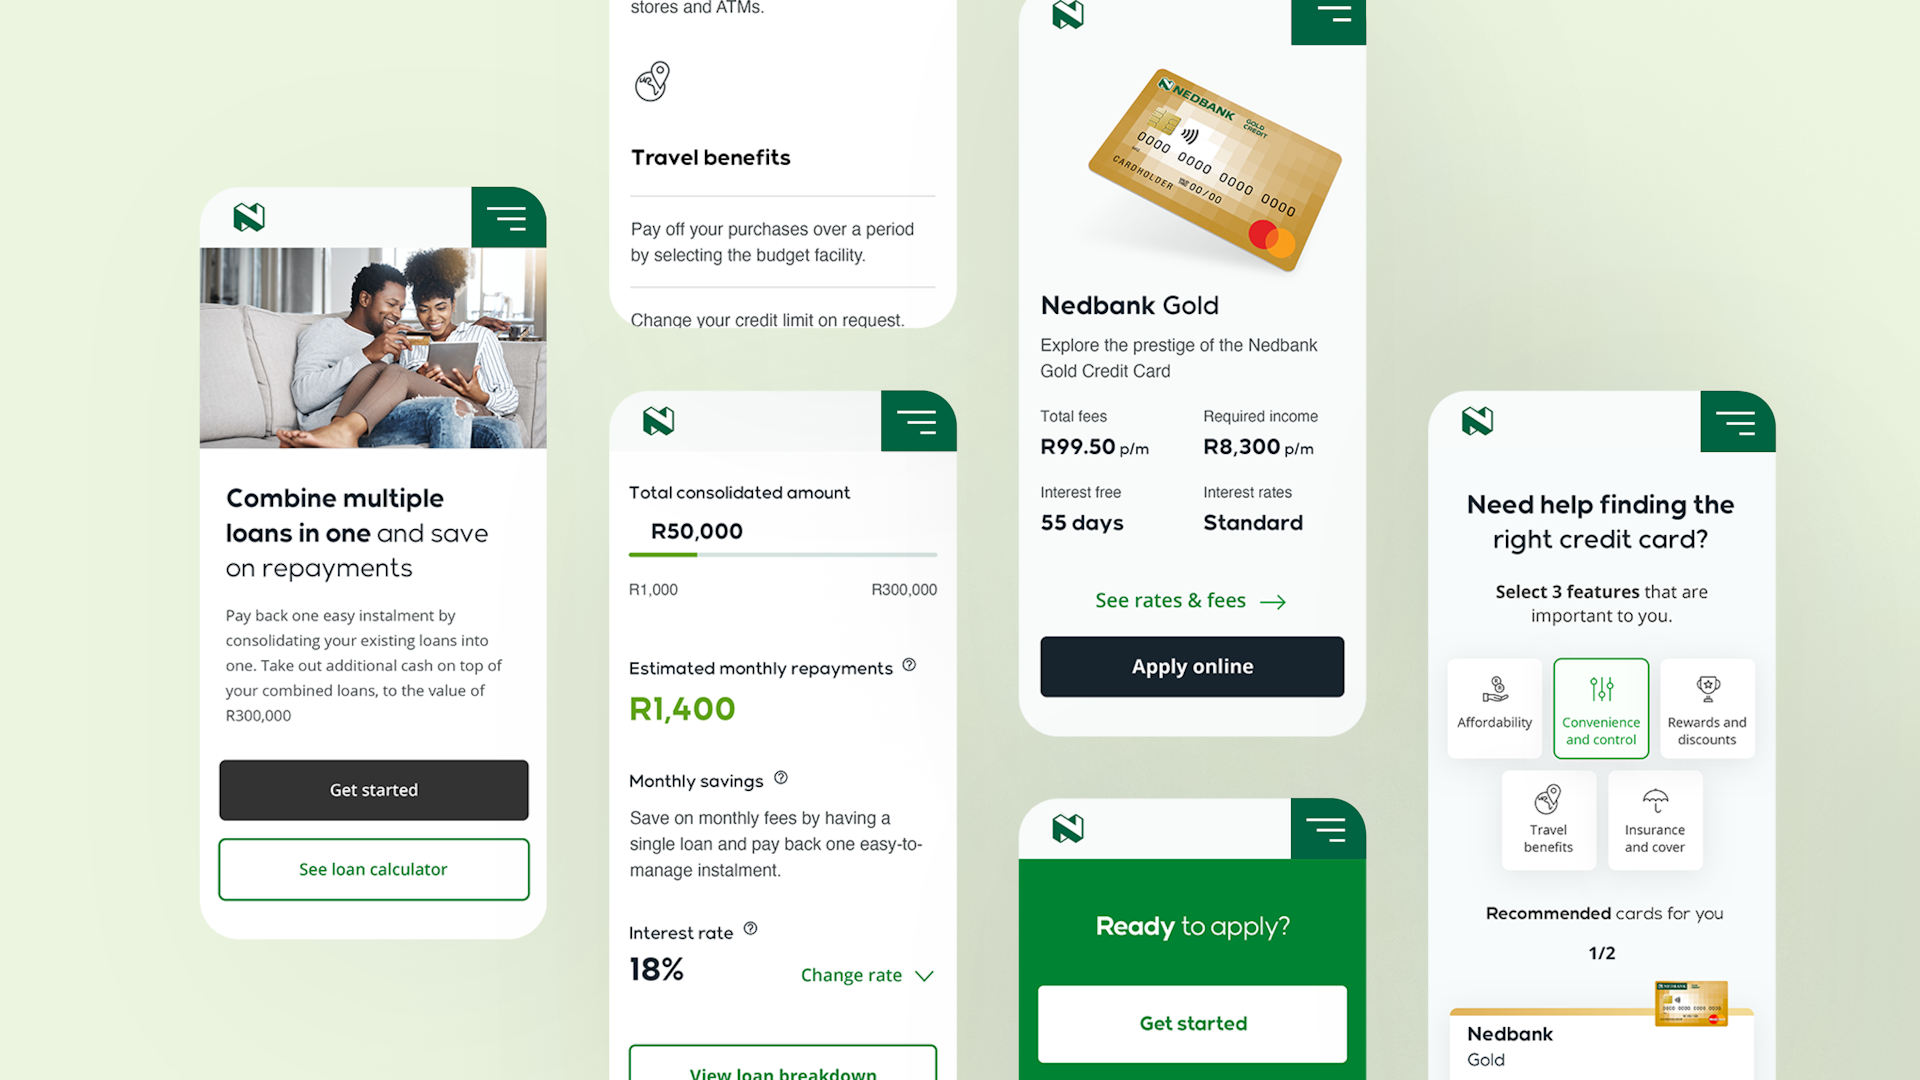 A series of screens from the rendering of a banking app, set on a light green background.